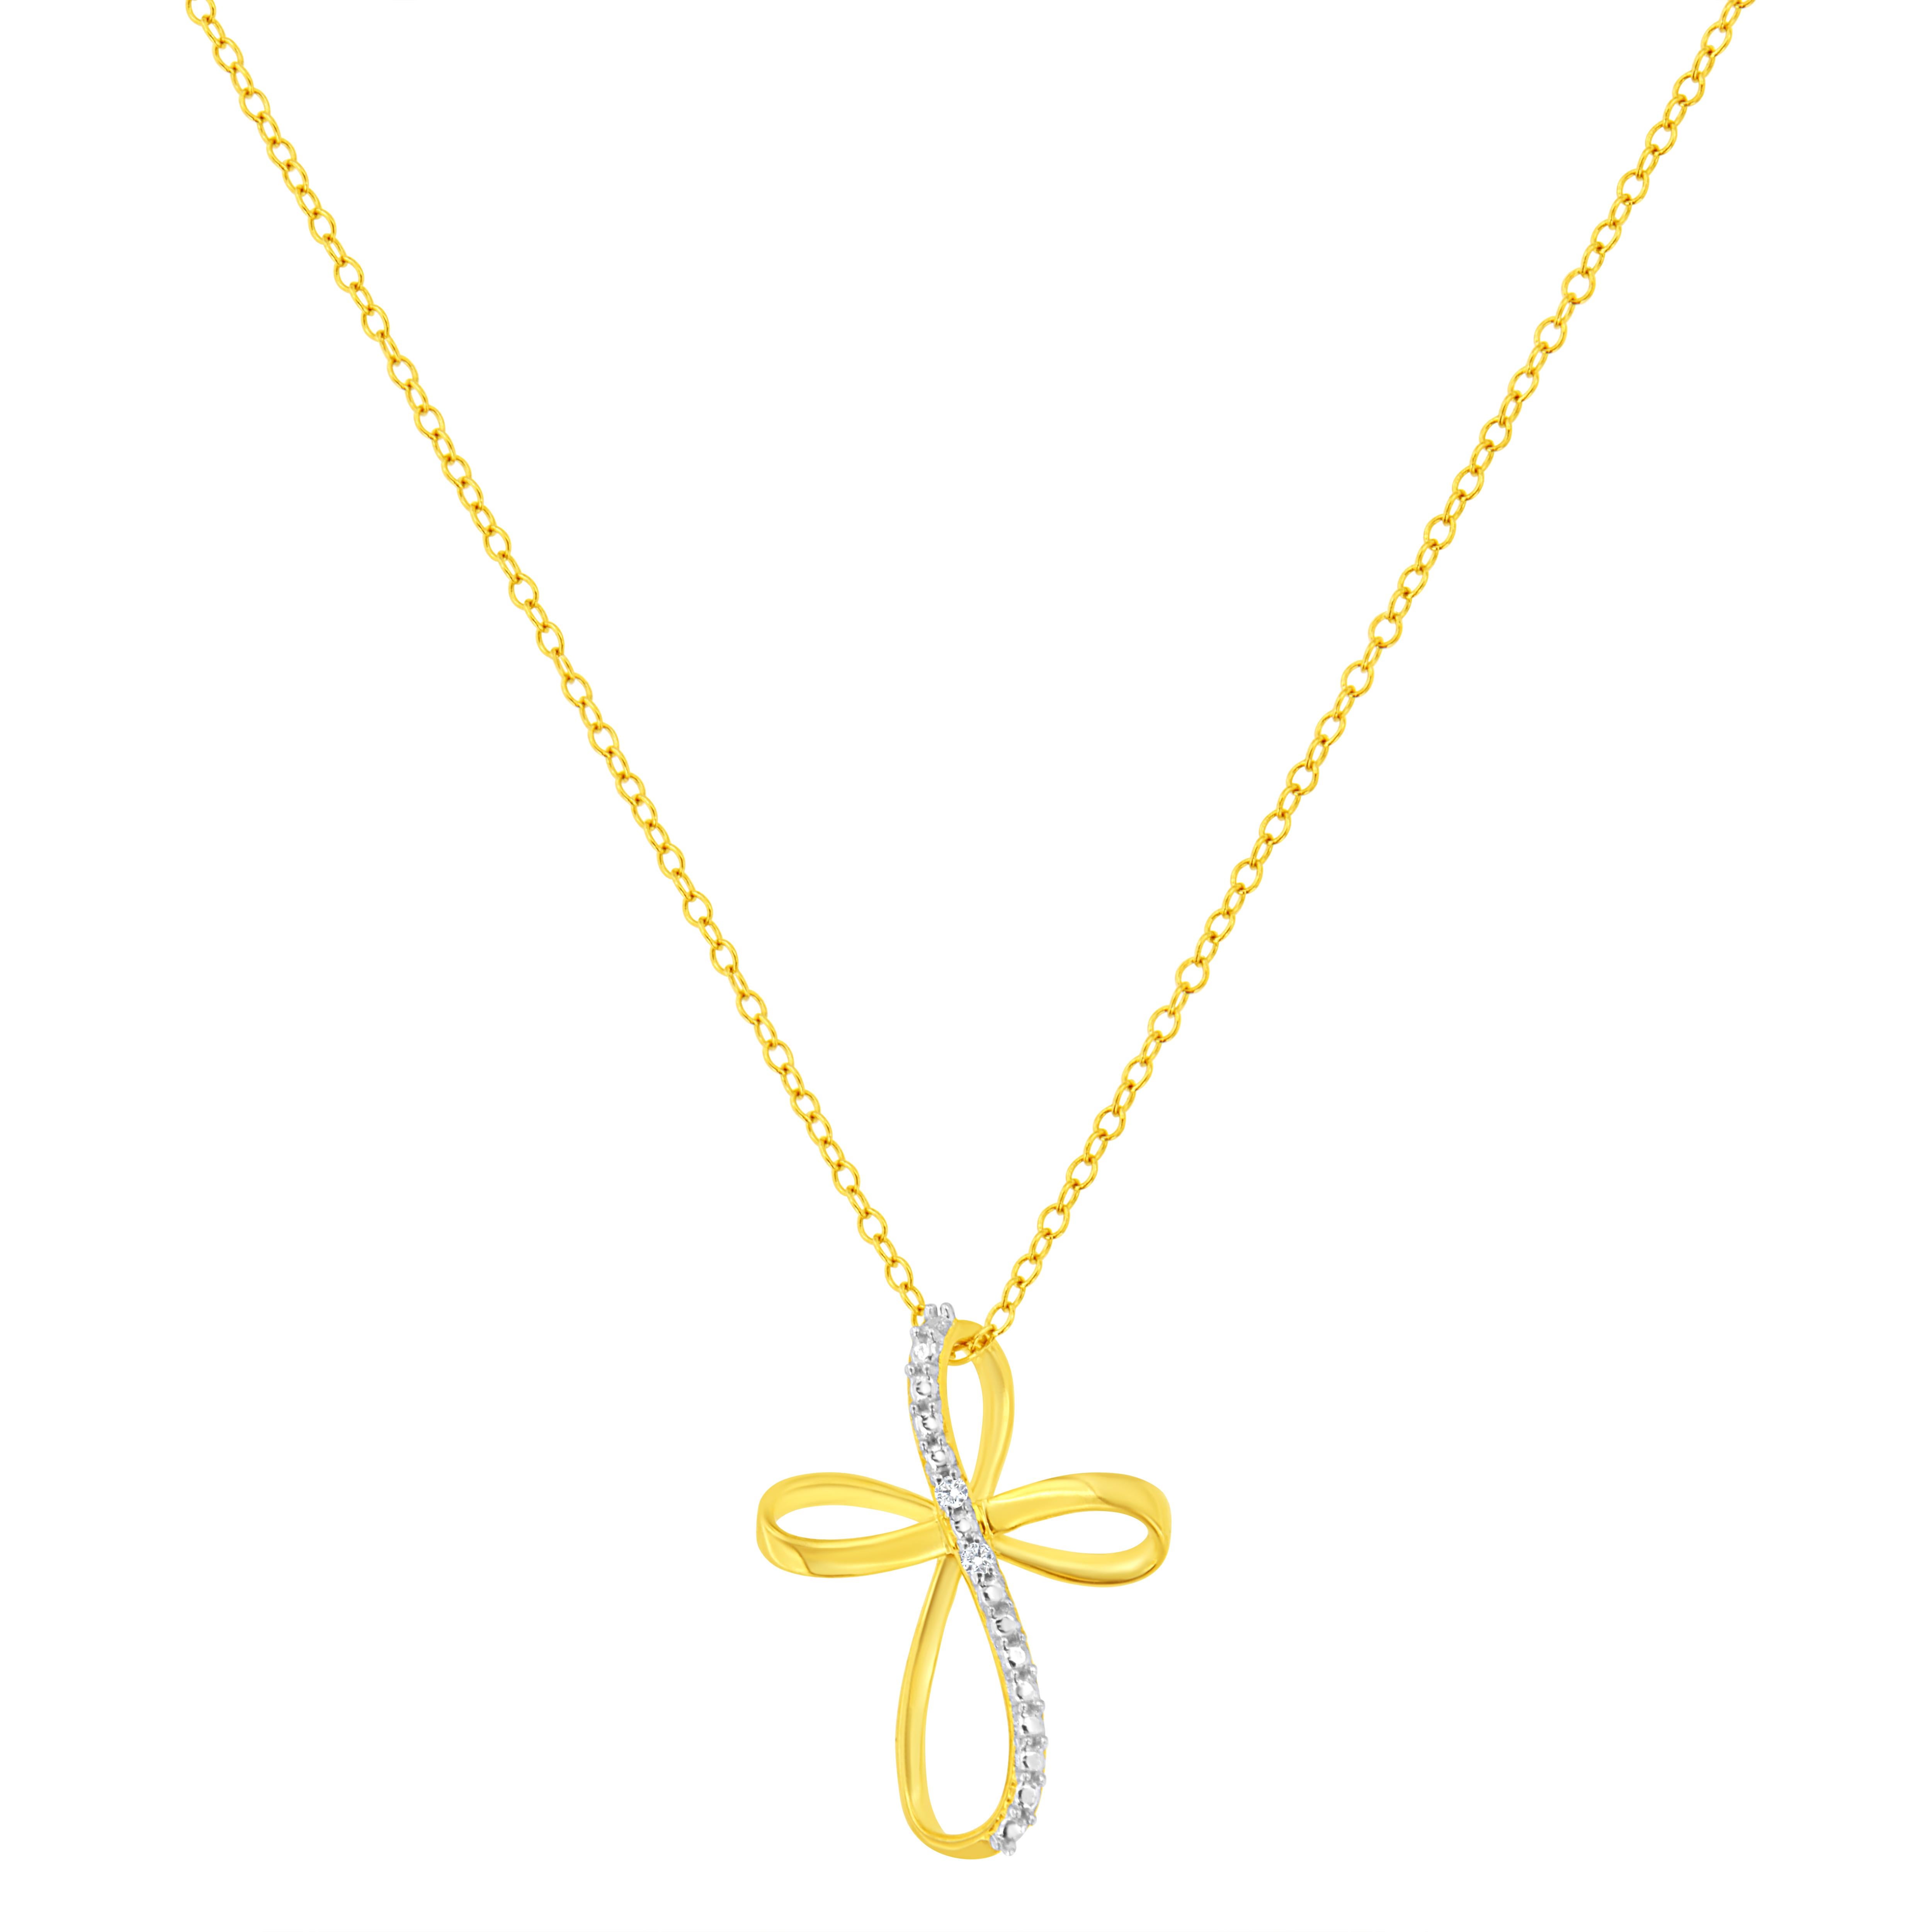 Show off your faith with this stunning 10K yellow gold coated .925 sterling silver ribbon cross pendant. The cross shaped pendant crafted with warm weaves of 10k yellow gold flashed sterling and is accented with 2 natural, round, diamonds, .The